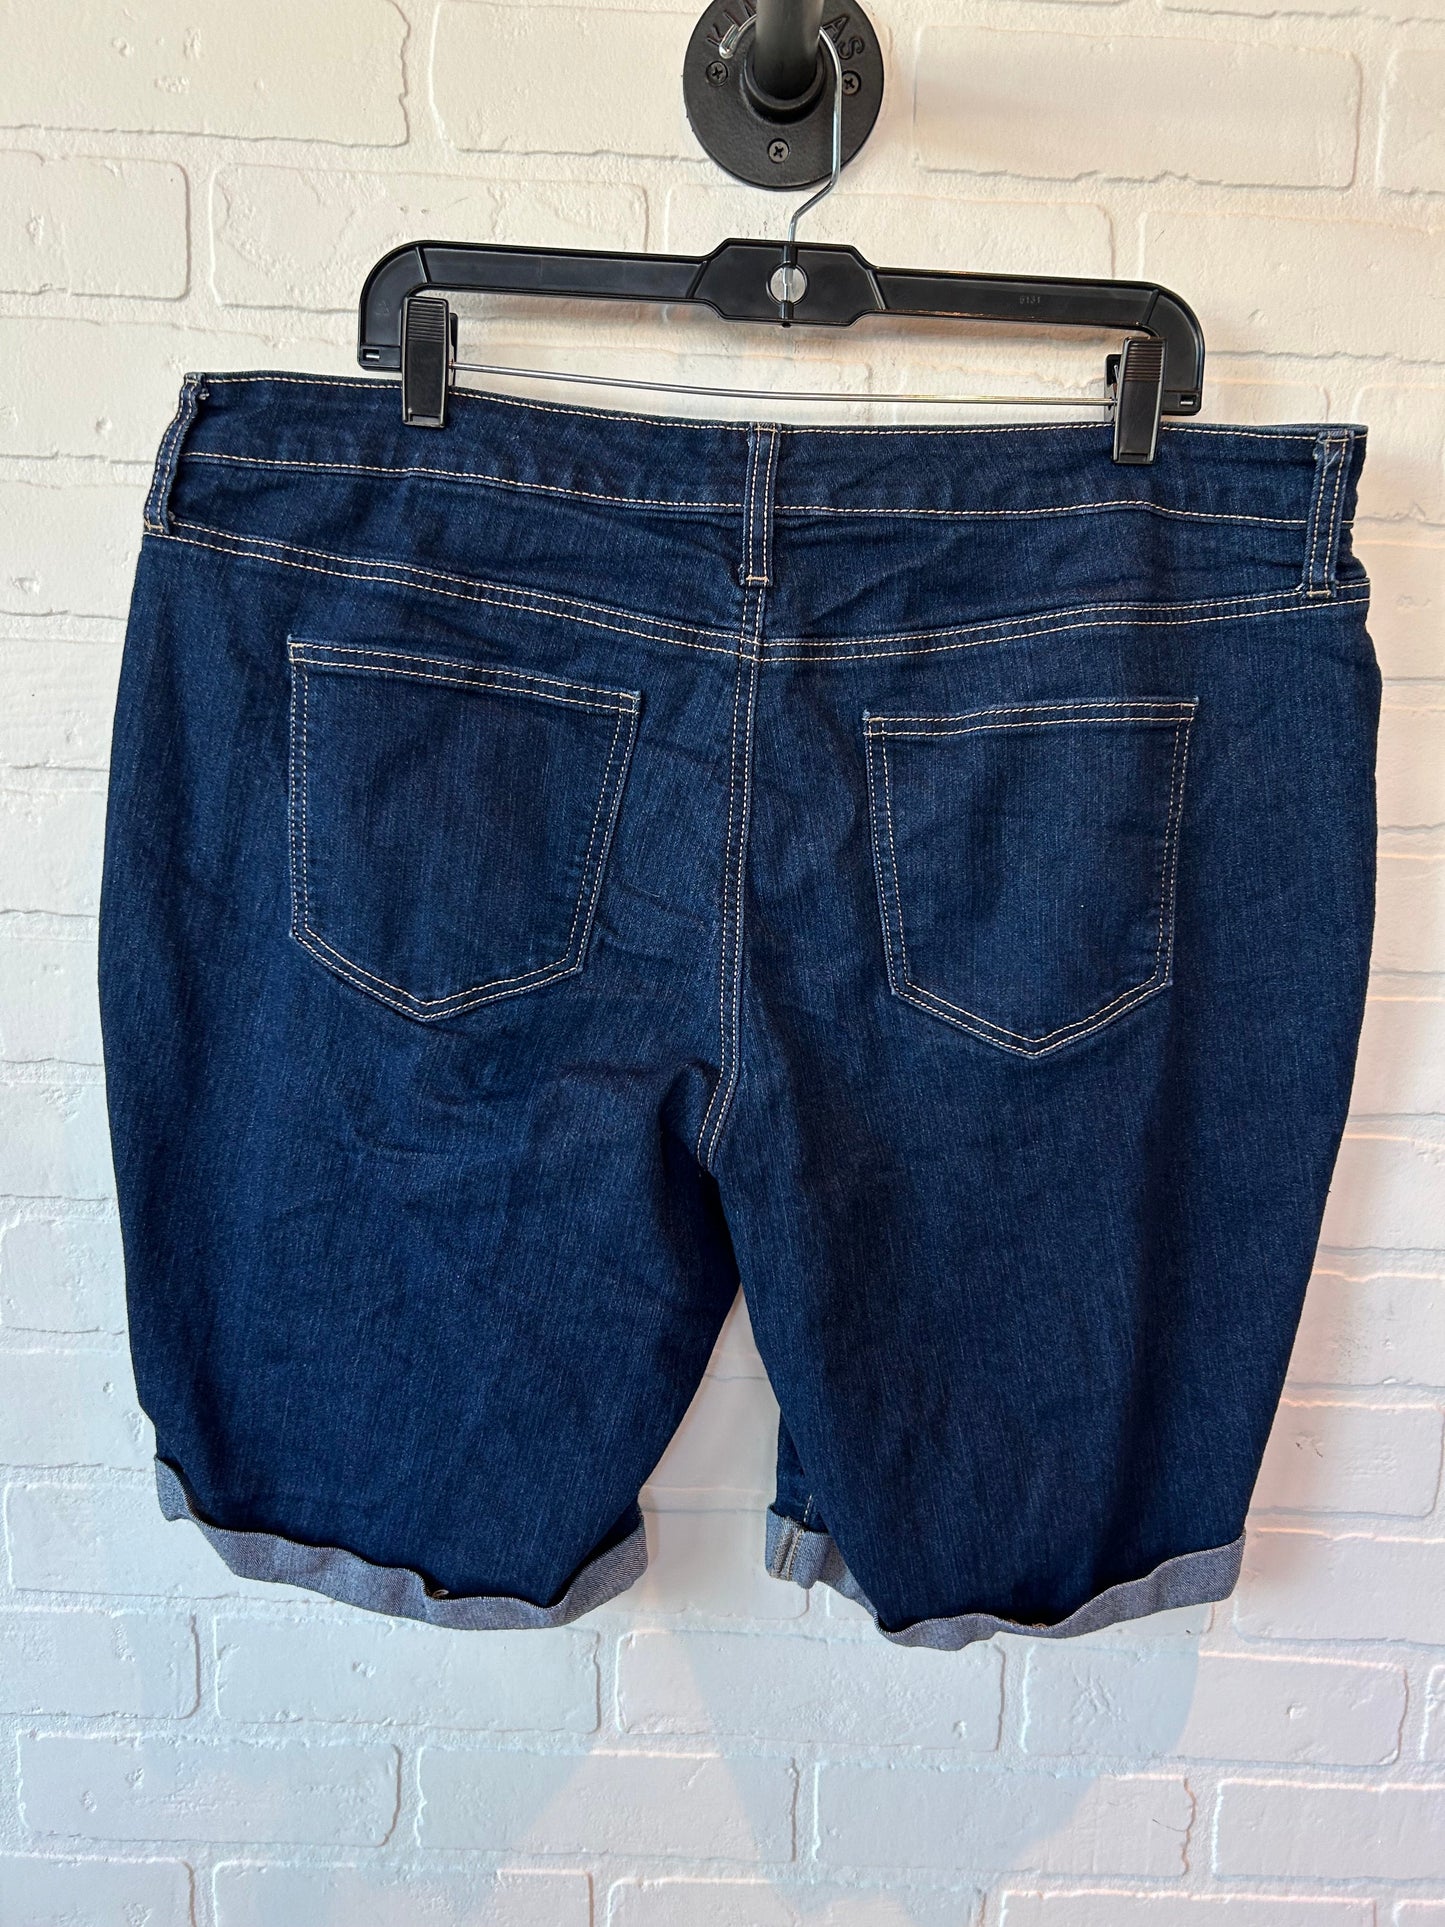 Blue Denim Shorts Style And Company, Size 1x